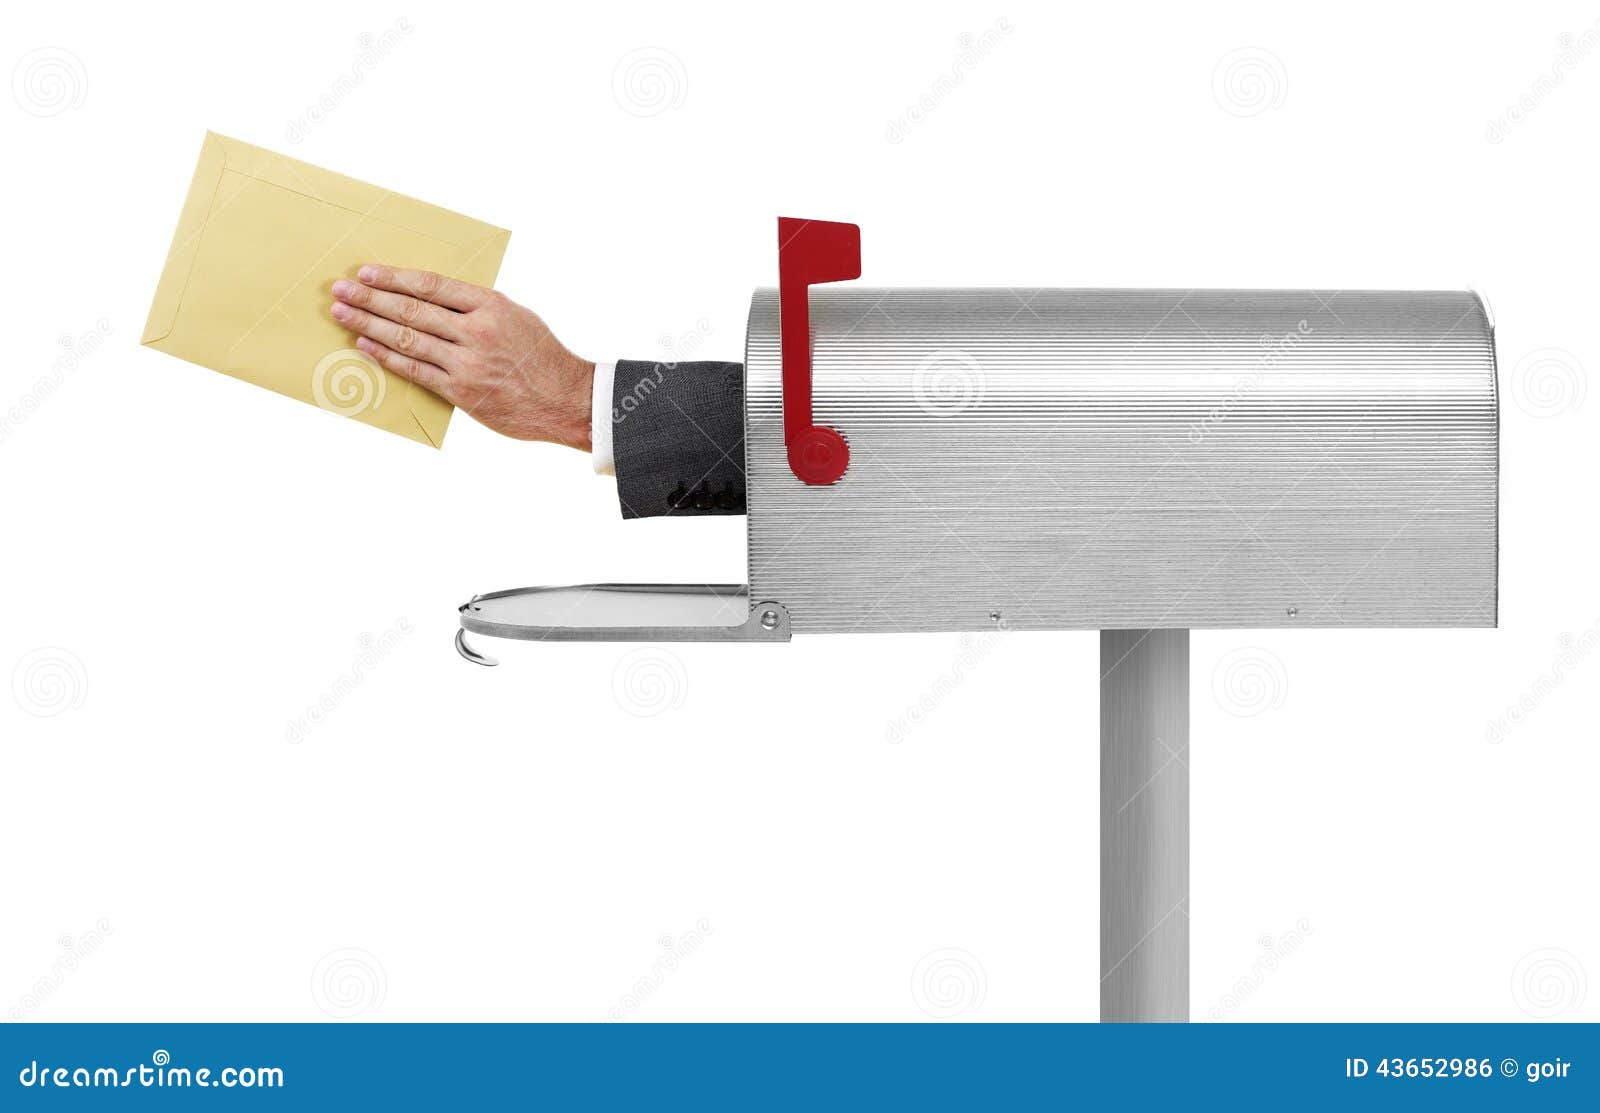 Your mail, please stock photo. Image of postal, mailbox - 43652986